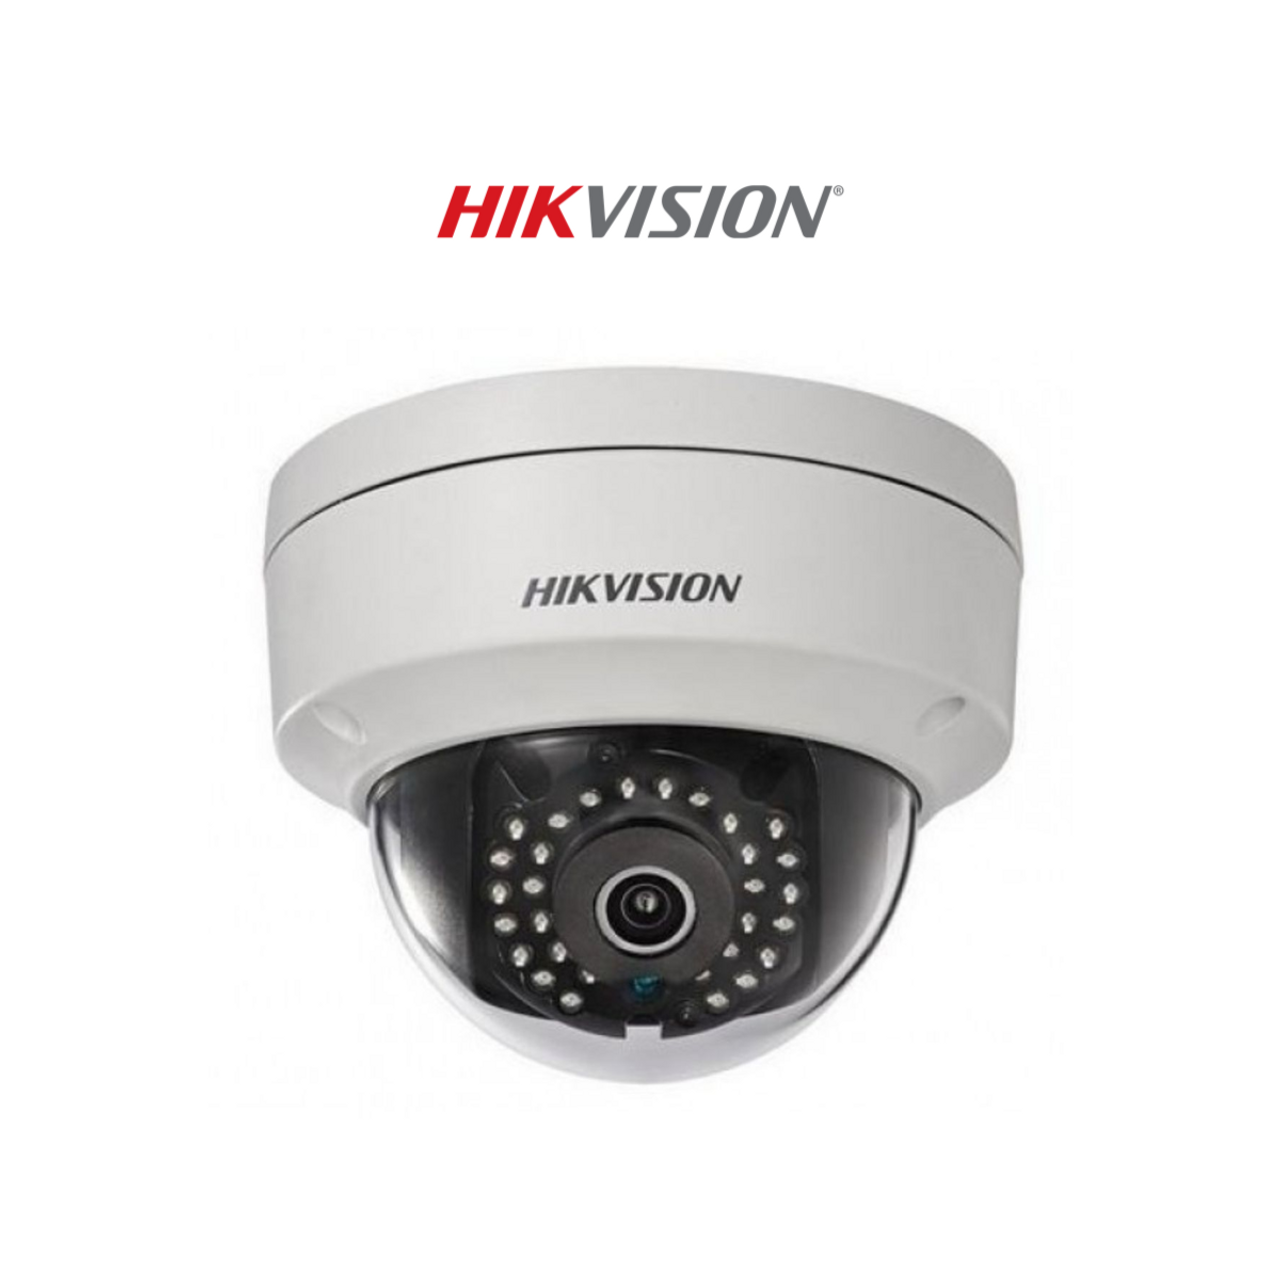 Hikvision 1.3MP HD Outdoor Security IP Camera product image